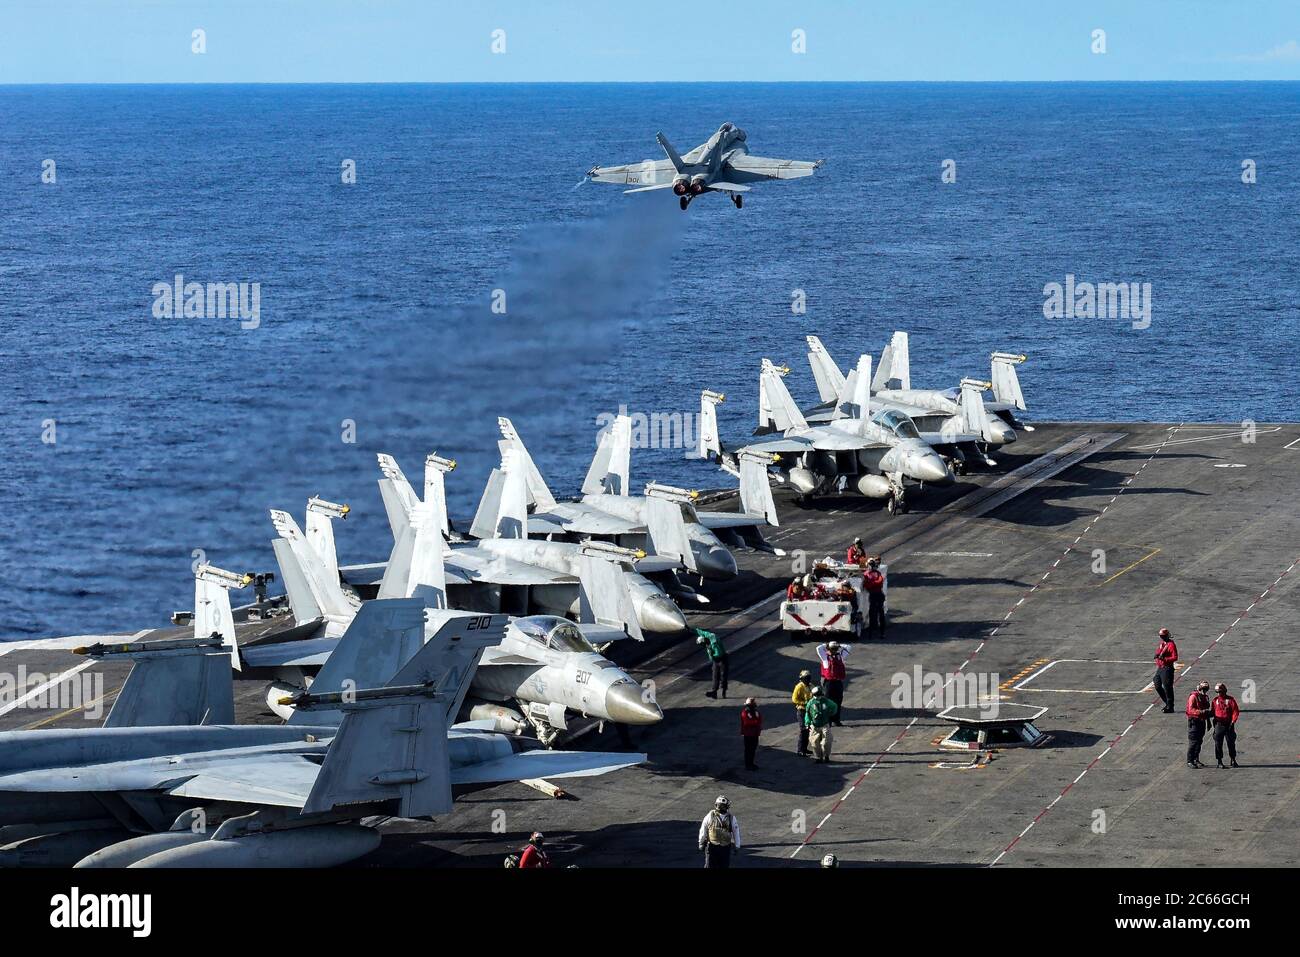 A U.S. Navy F/A-18E Super Hornet fighter aircraft, from the Eagles of Strike Fighter Squadron 115, launches from the flight deck of the Nimitz-class aircraft carrier USS Ronald Reagan during dual-carrier operations July 5, 2020 in the South China Sea. Stock Photo